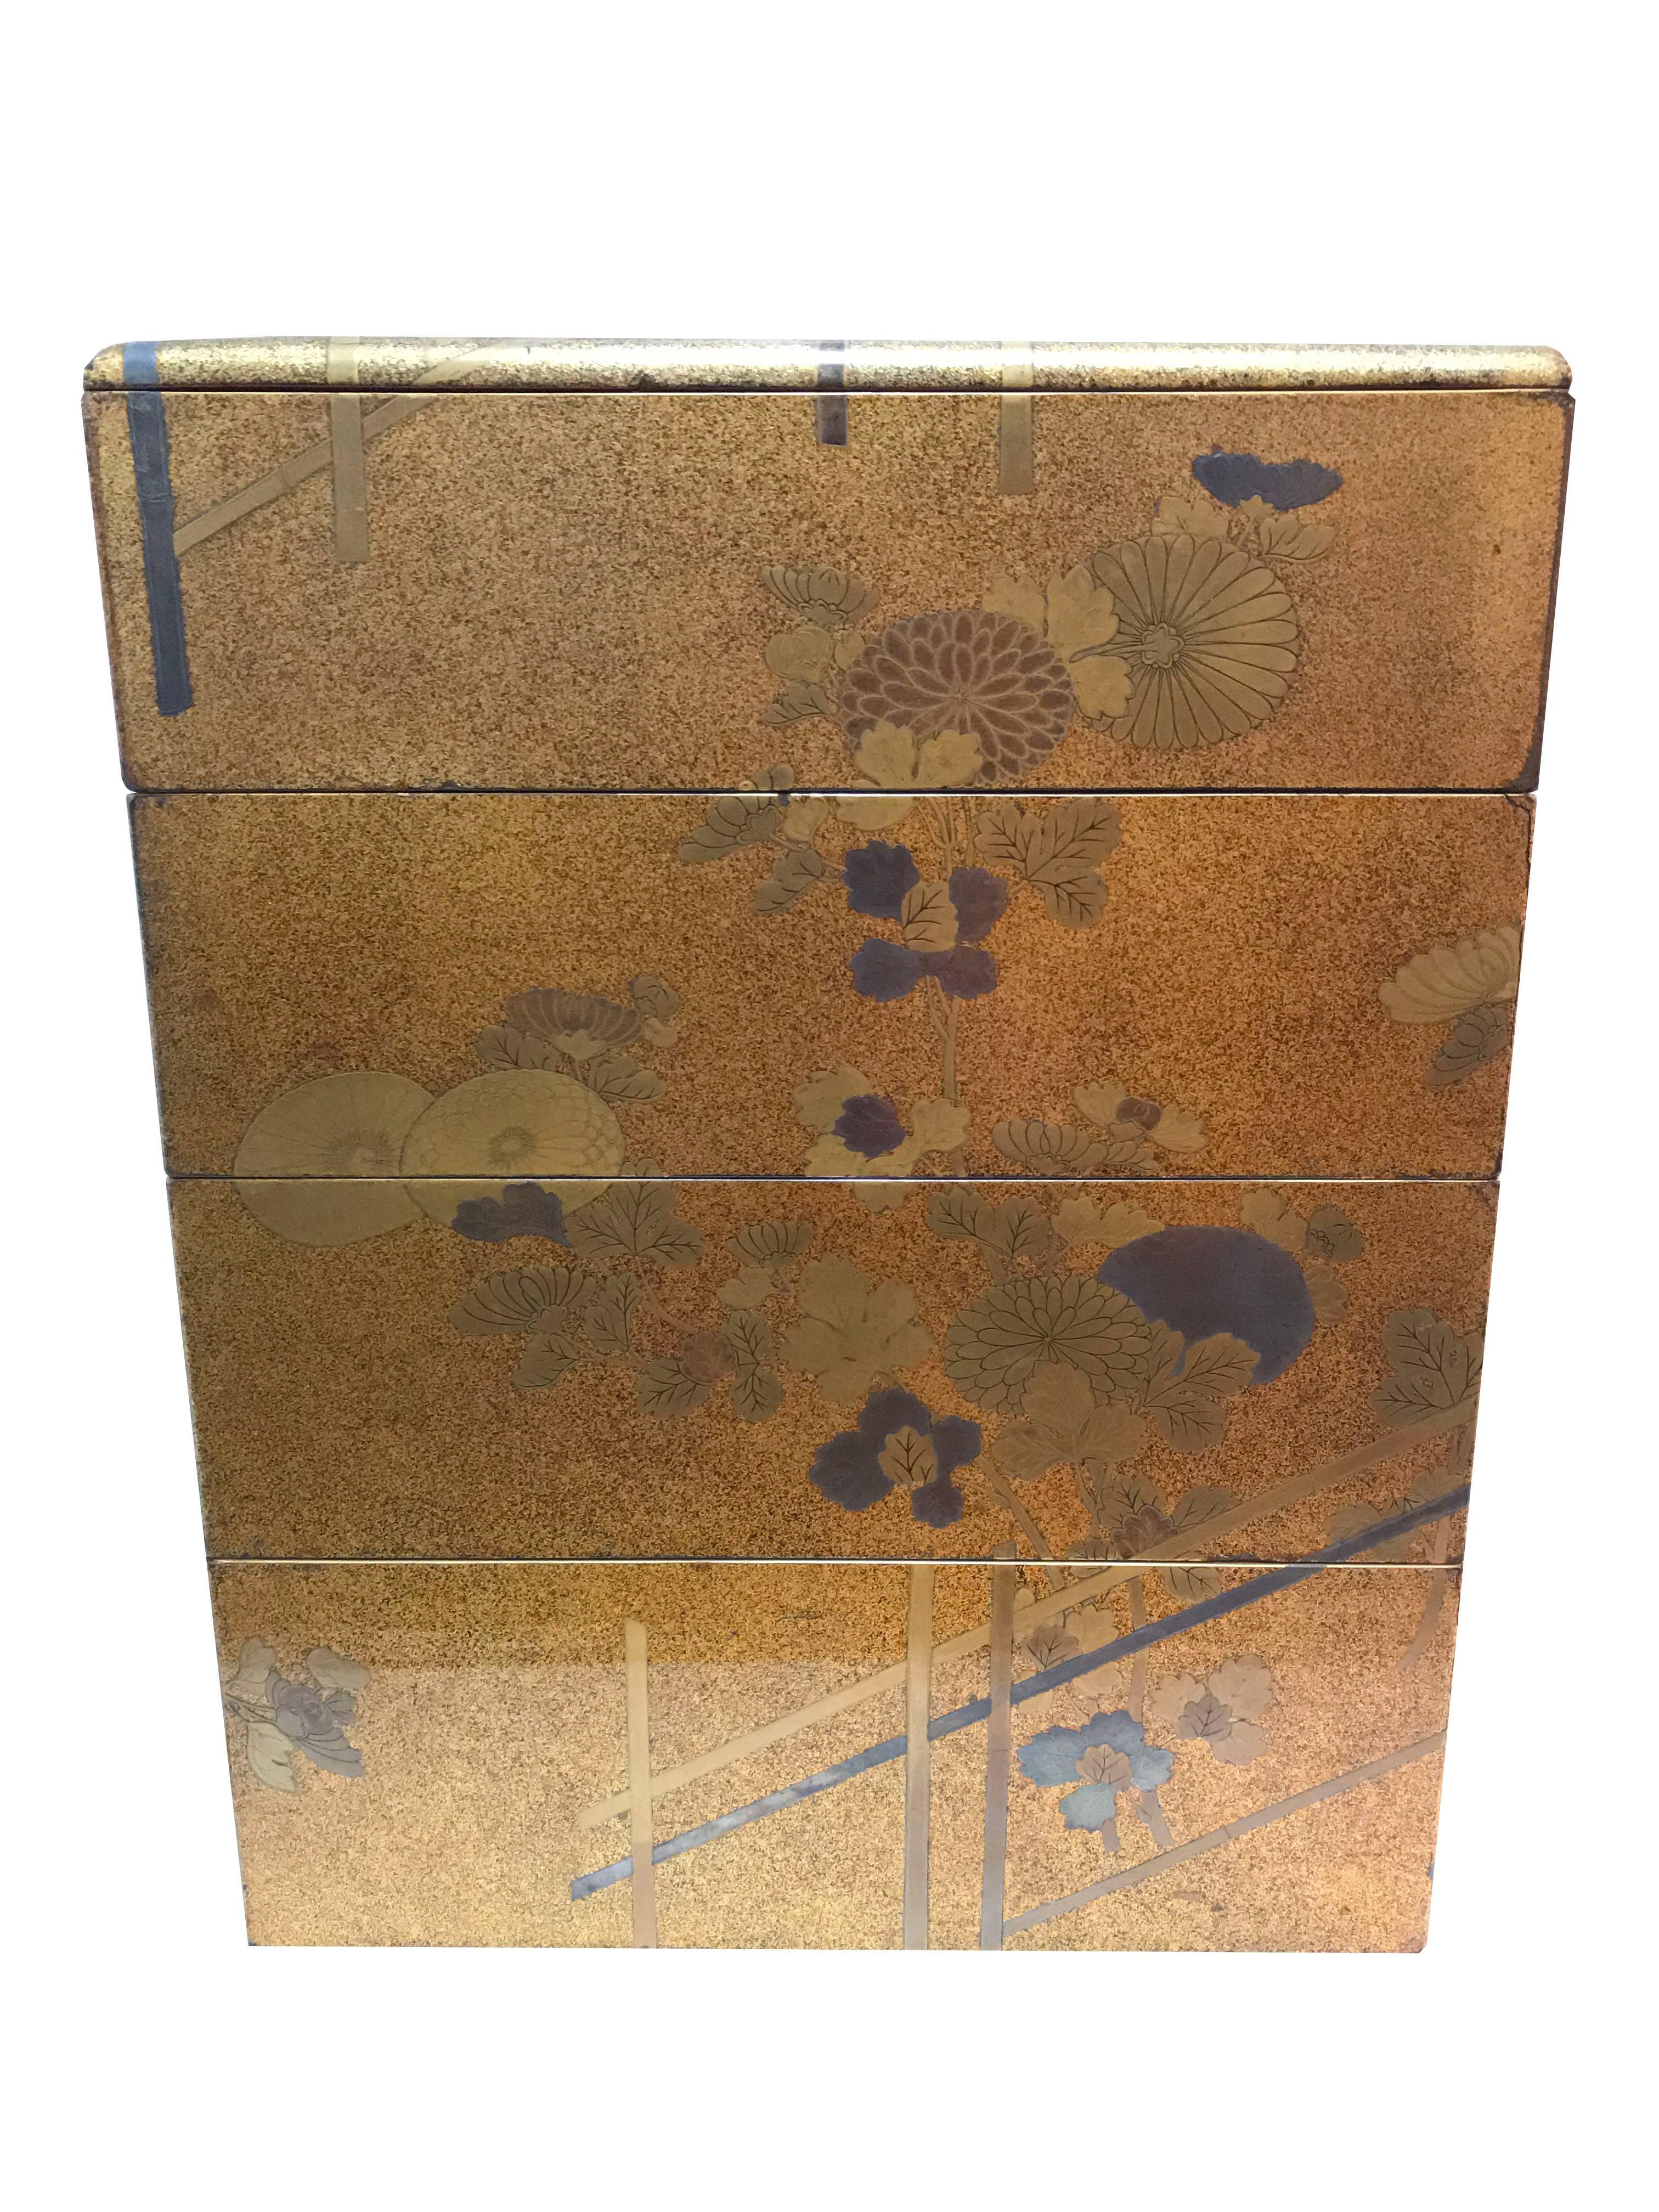 Hand-Crafted Early 19th Century Bento Box with Chrysanthemum Design, Edo Period, Art of Japan